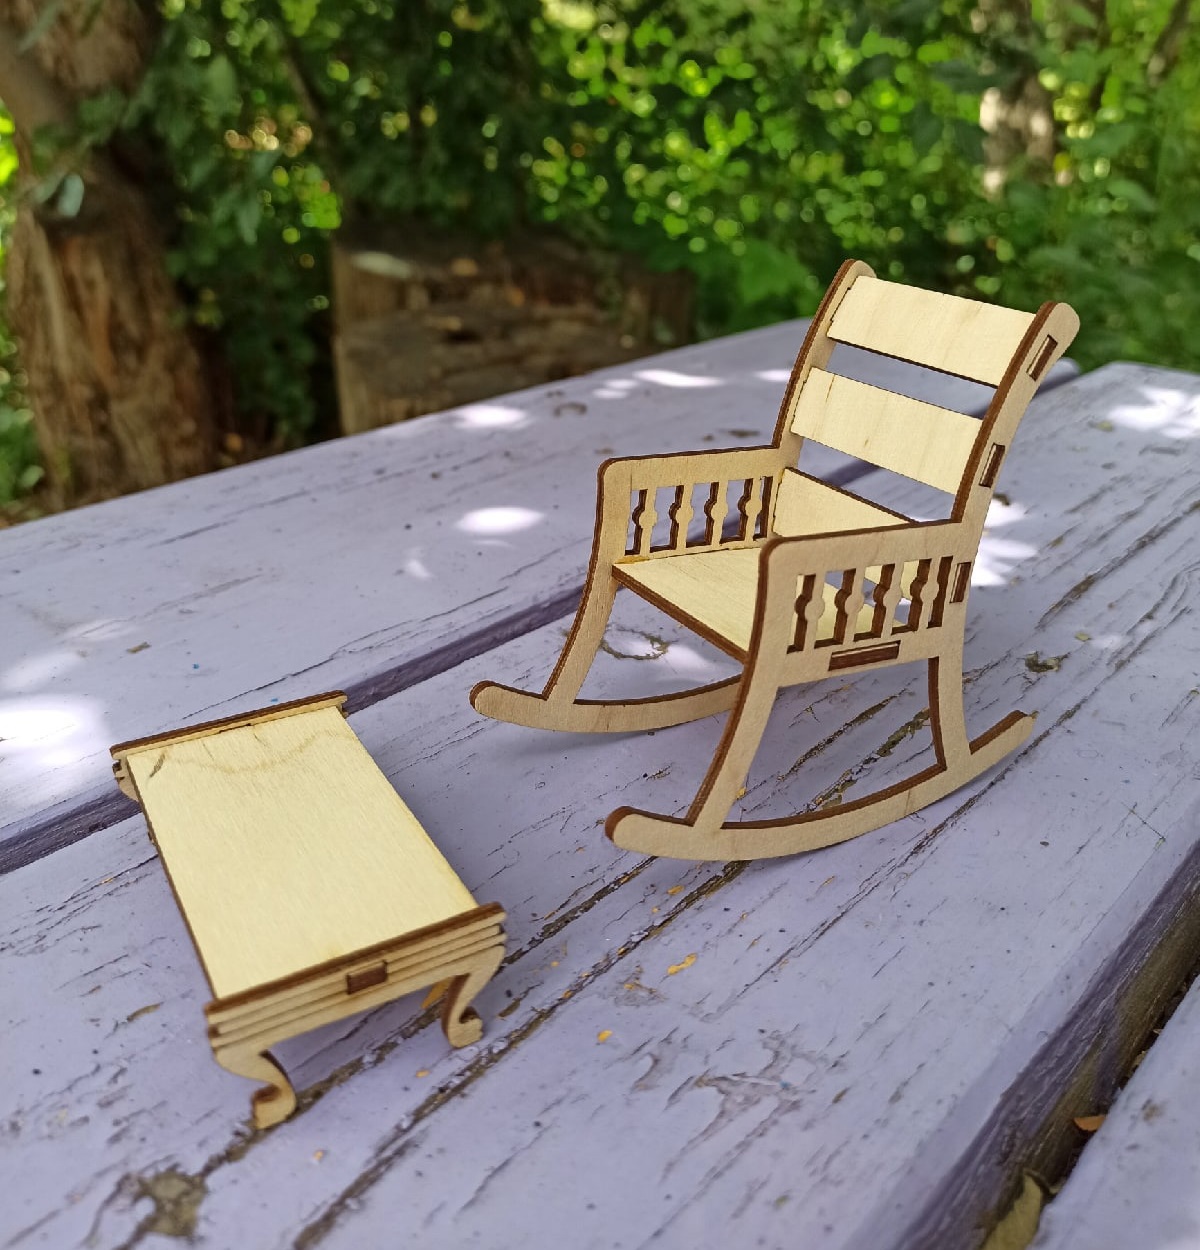 Laser Cut Wooden Doll House Furniture DXF File